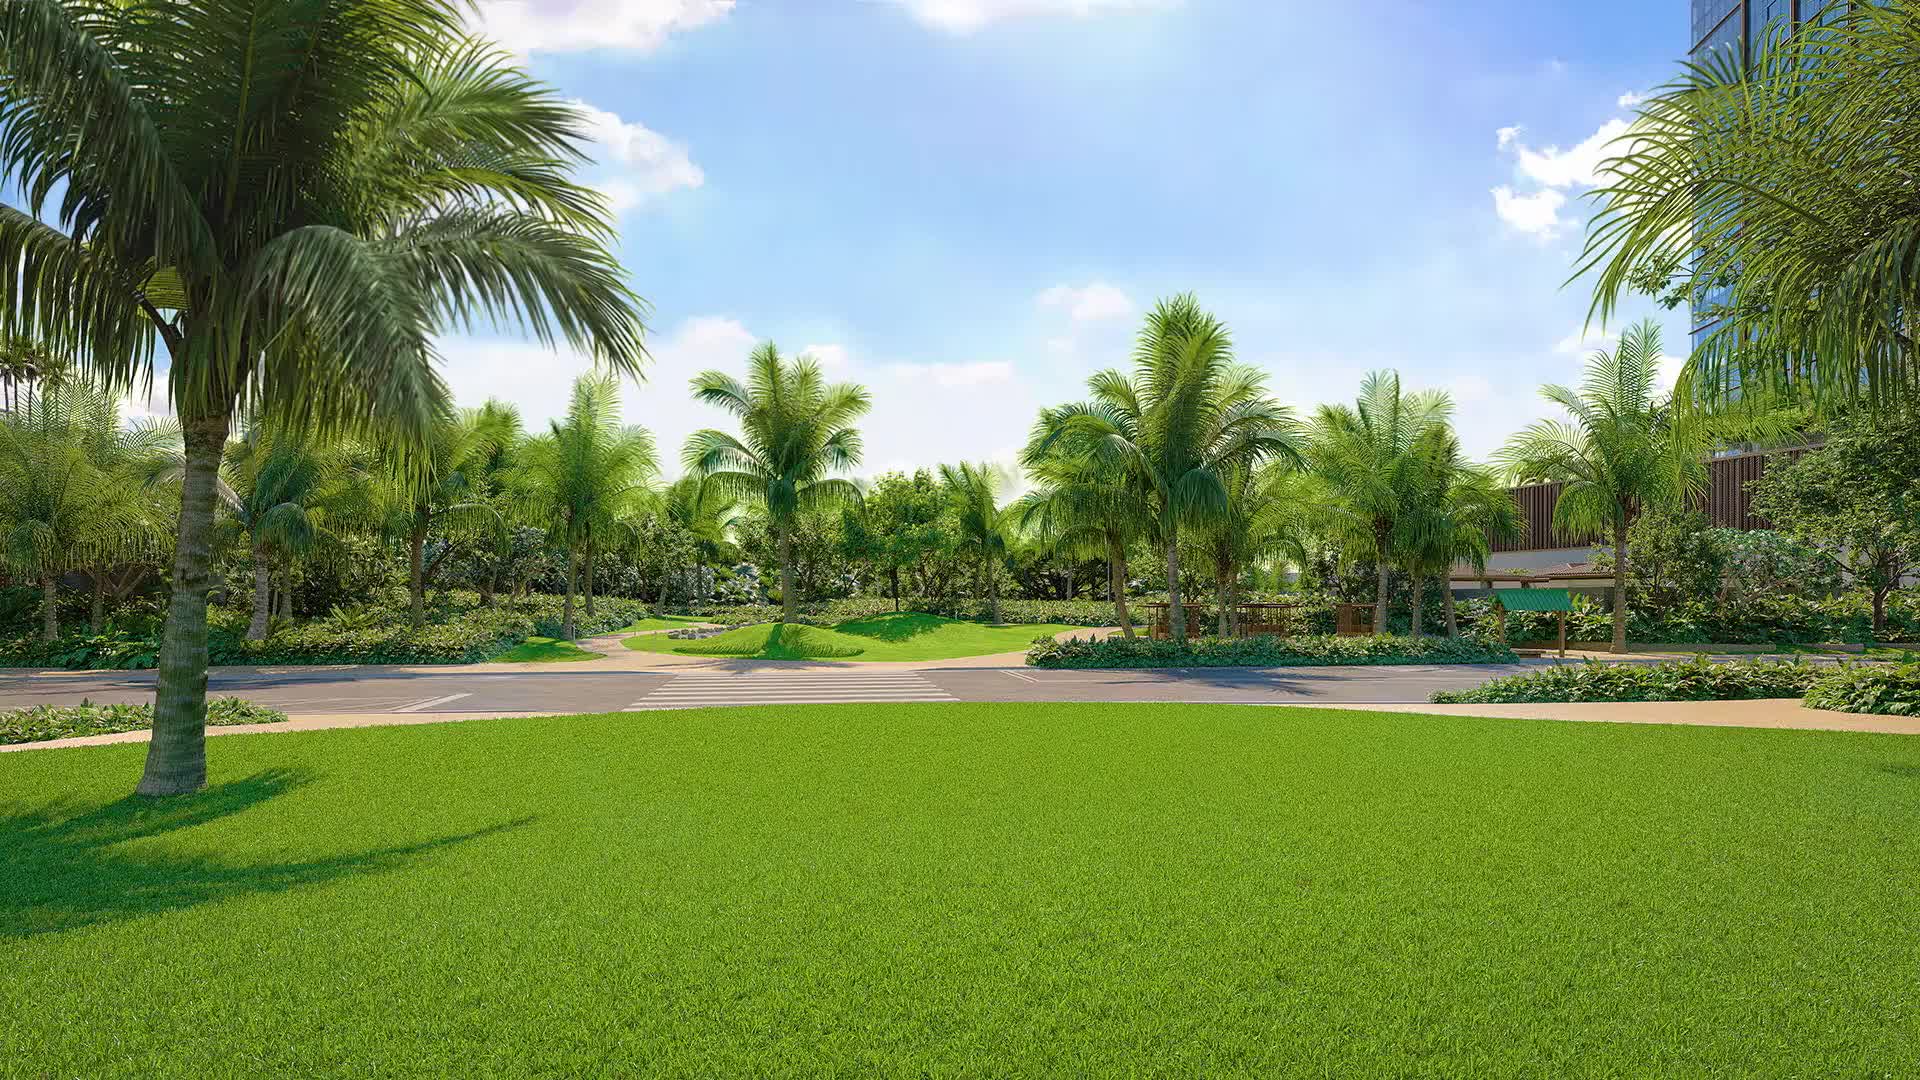 Outdoor shot with green lawn, palm trees, and paved walkway